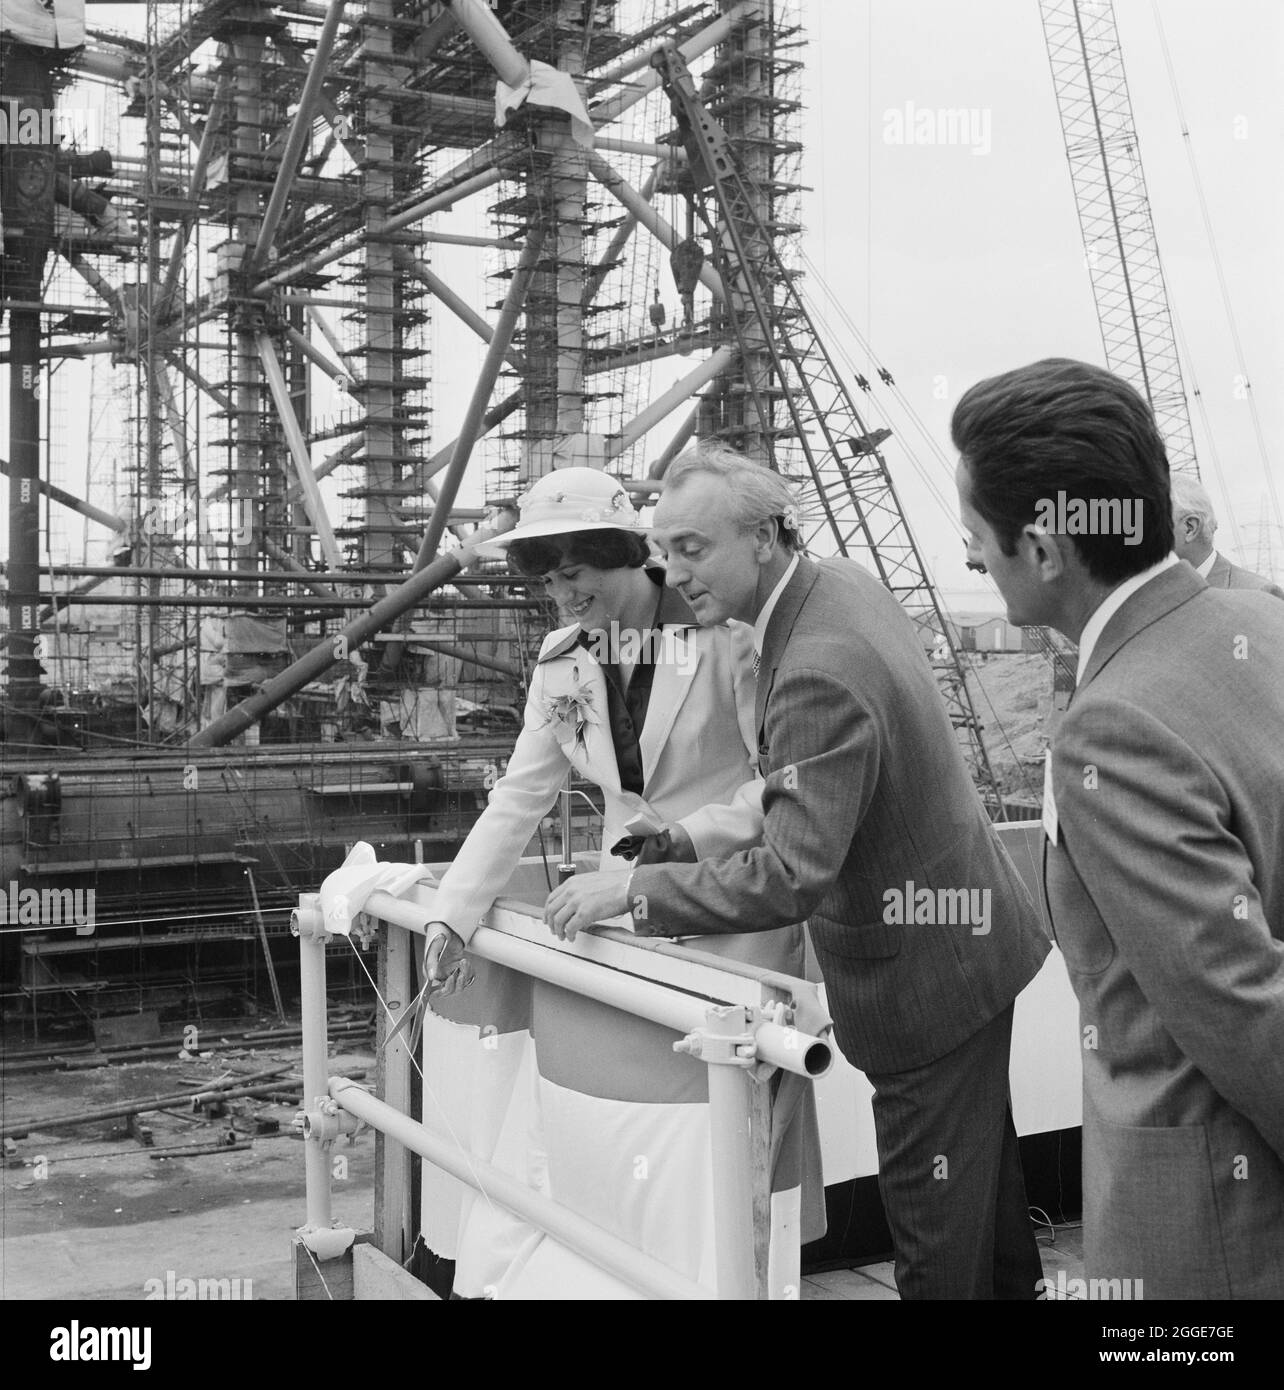 The naming ceremony of the oil platform Thistle A being carried out by J Potts, an apprentice draughtswoman at Graythorp. In the early 1970s Laing Pipelines Offshore constructed the Graythorp fabrication yard and dry dock on the site of the old William Gray Shipyard. The company created a dry dock which was used for the construction of fixed platform North Sea drilling rigs for the BP North Sea Oil Project. Oil platforms, Graythorp I and Graythorp II were built at this site between 1972-1975, followed by Thistle A, which at the time was the largest steel oil production platform in the world. T Stock Photo